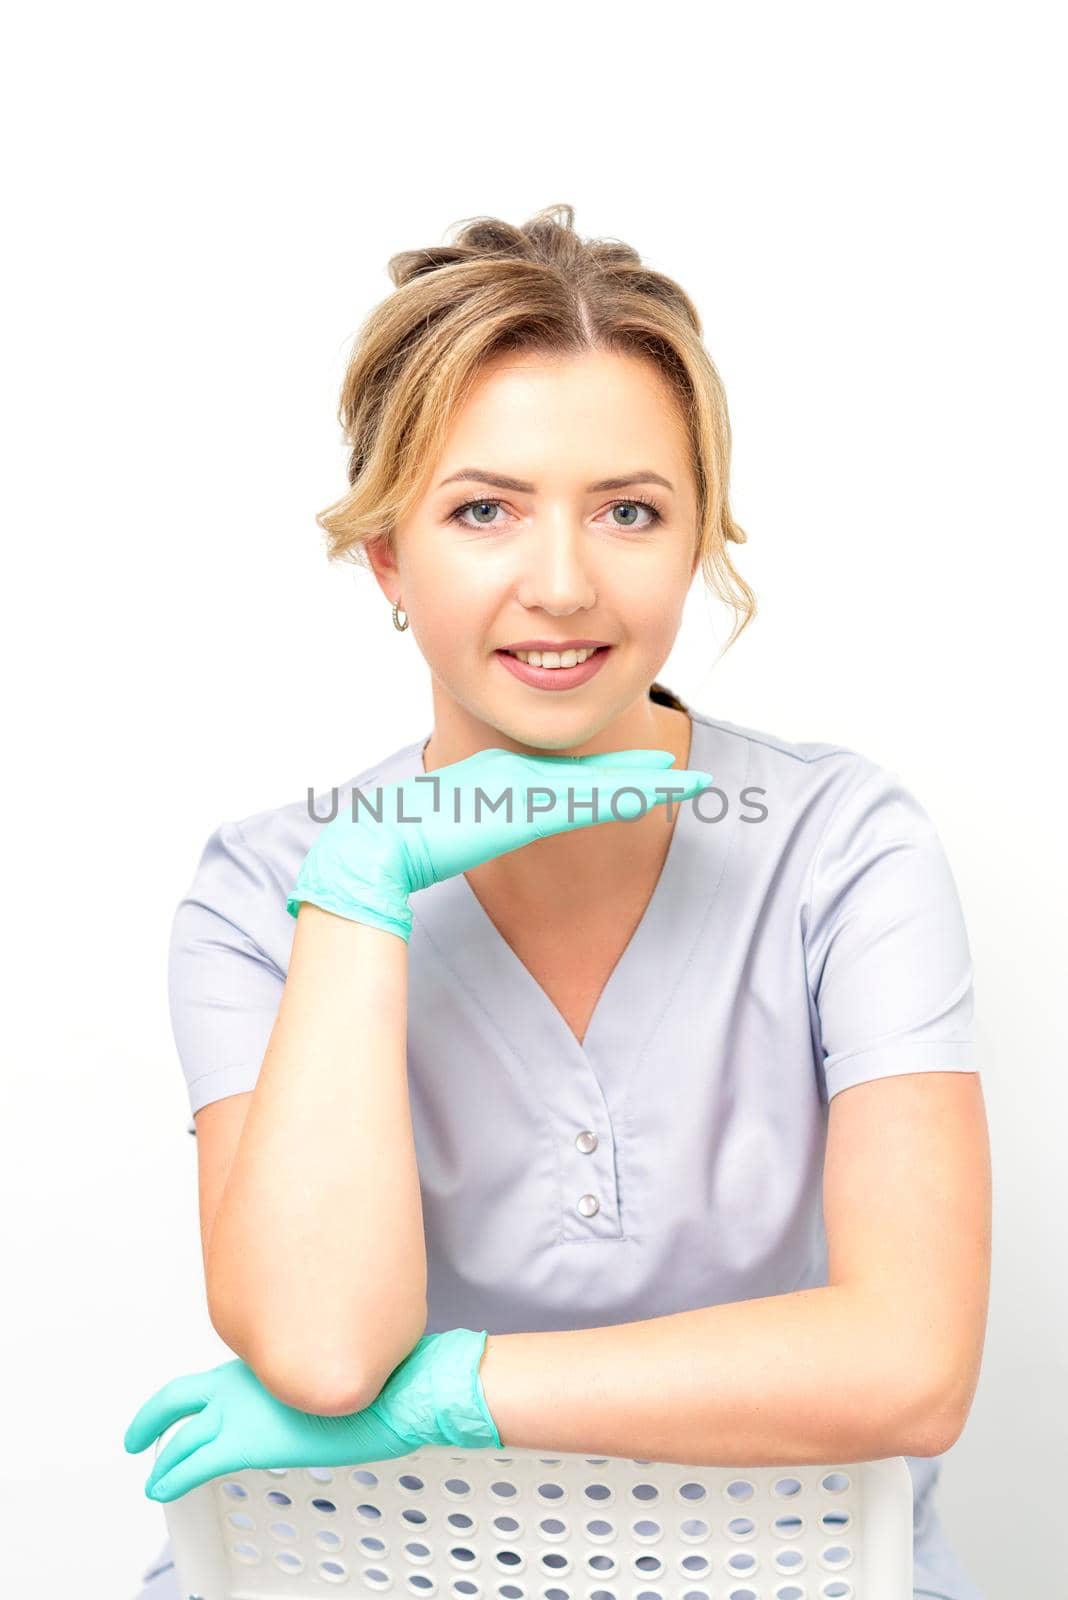 Close-up portrait of young smiling female caucasian healthcare worker sitting and staring at the camera wearing gloves on white background. by okskukuruza